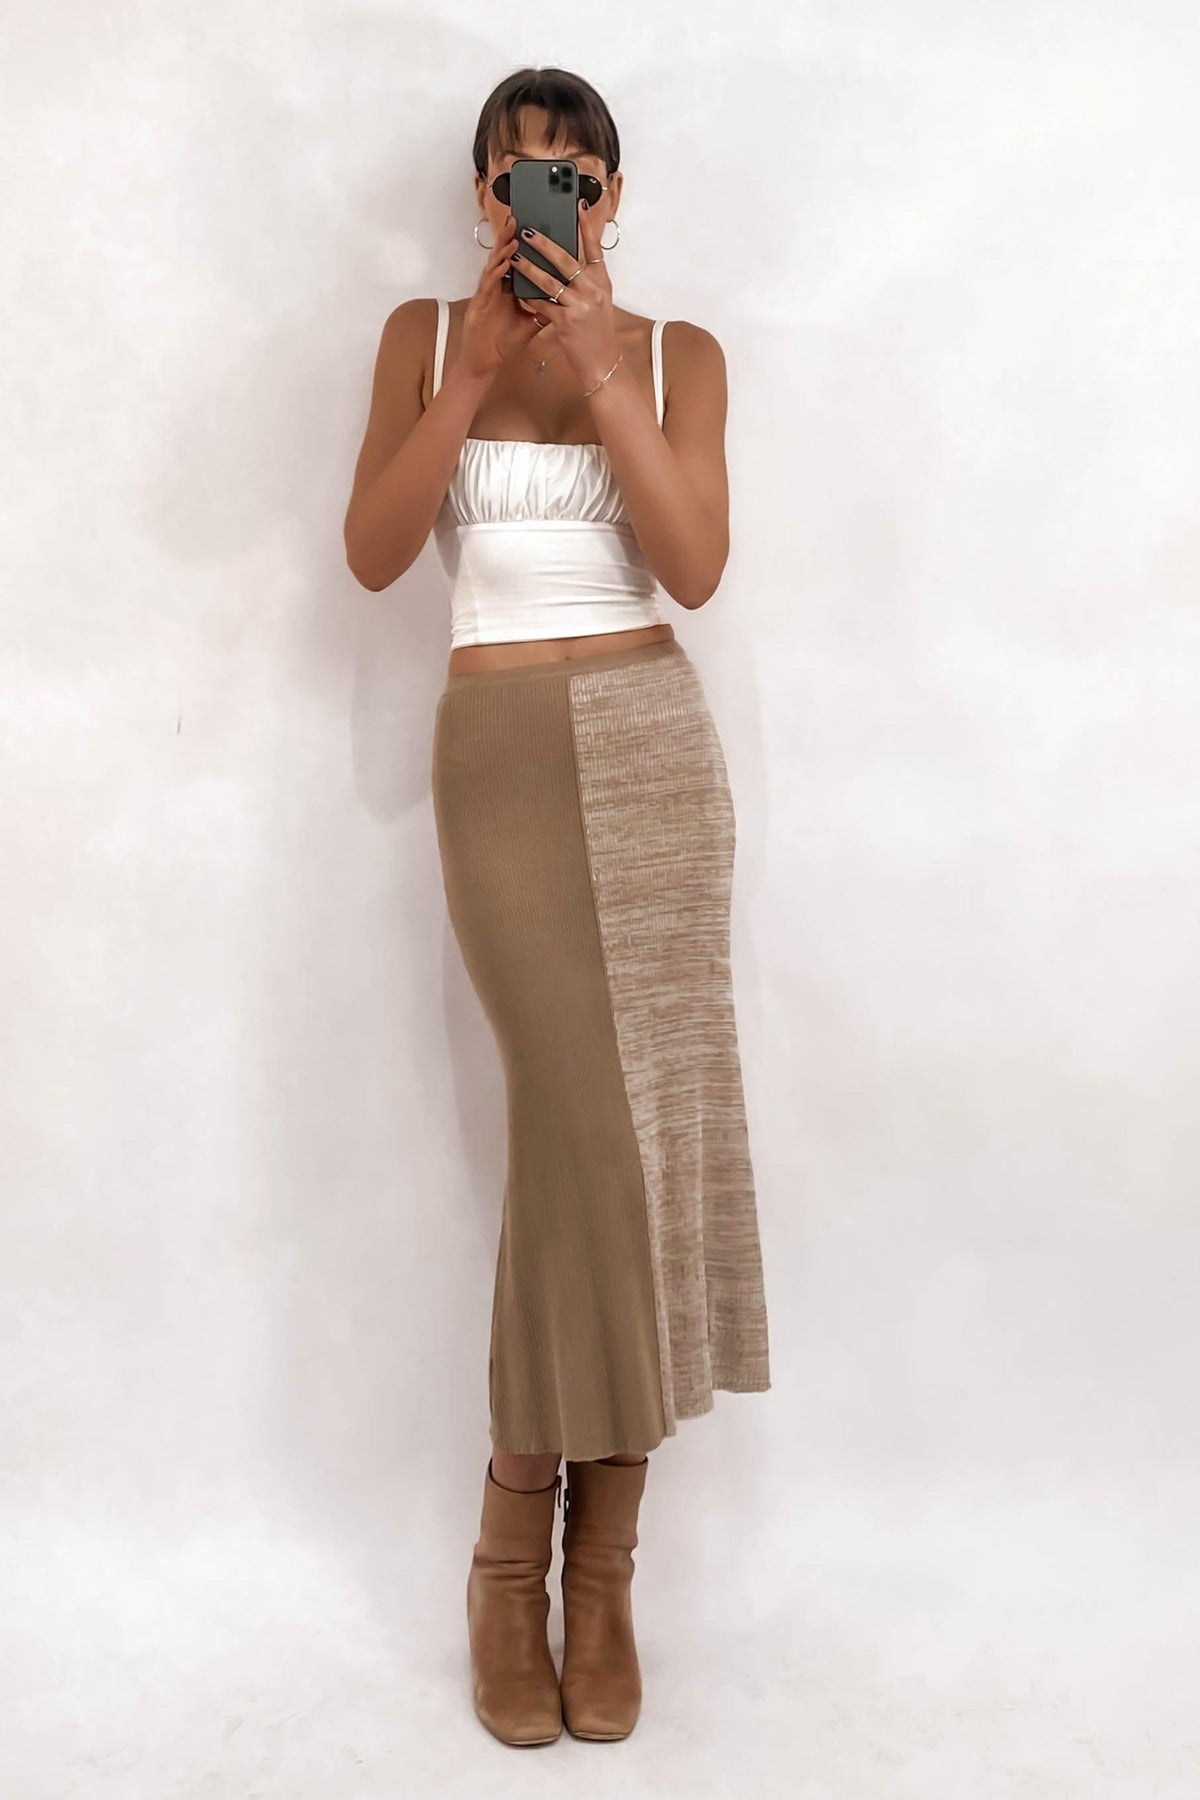 Florenz Skirt, BEIGE, BOTTOMS, MIDI SKIRT, POLYESTER, SETS, SKIRT, SKIRTS, Our New Florenz Skirt Is Now Only $60.00 Exclusive At Mishkah, Our New Florenz Skirt is only $60.00-We Have The Latest Pants | Shorts | Skirts @ Mishkah Online Fashion Boutique-MISHKAH